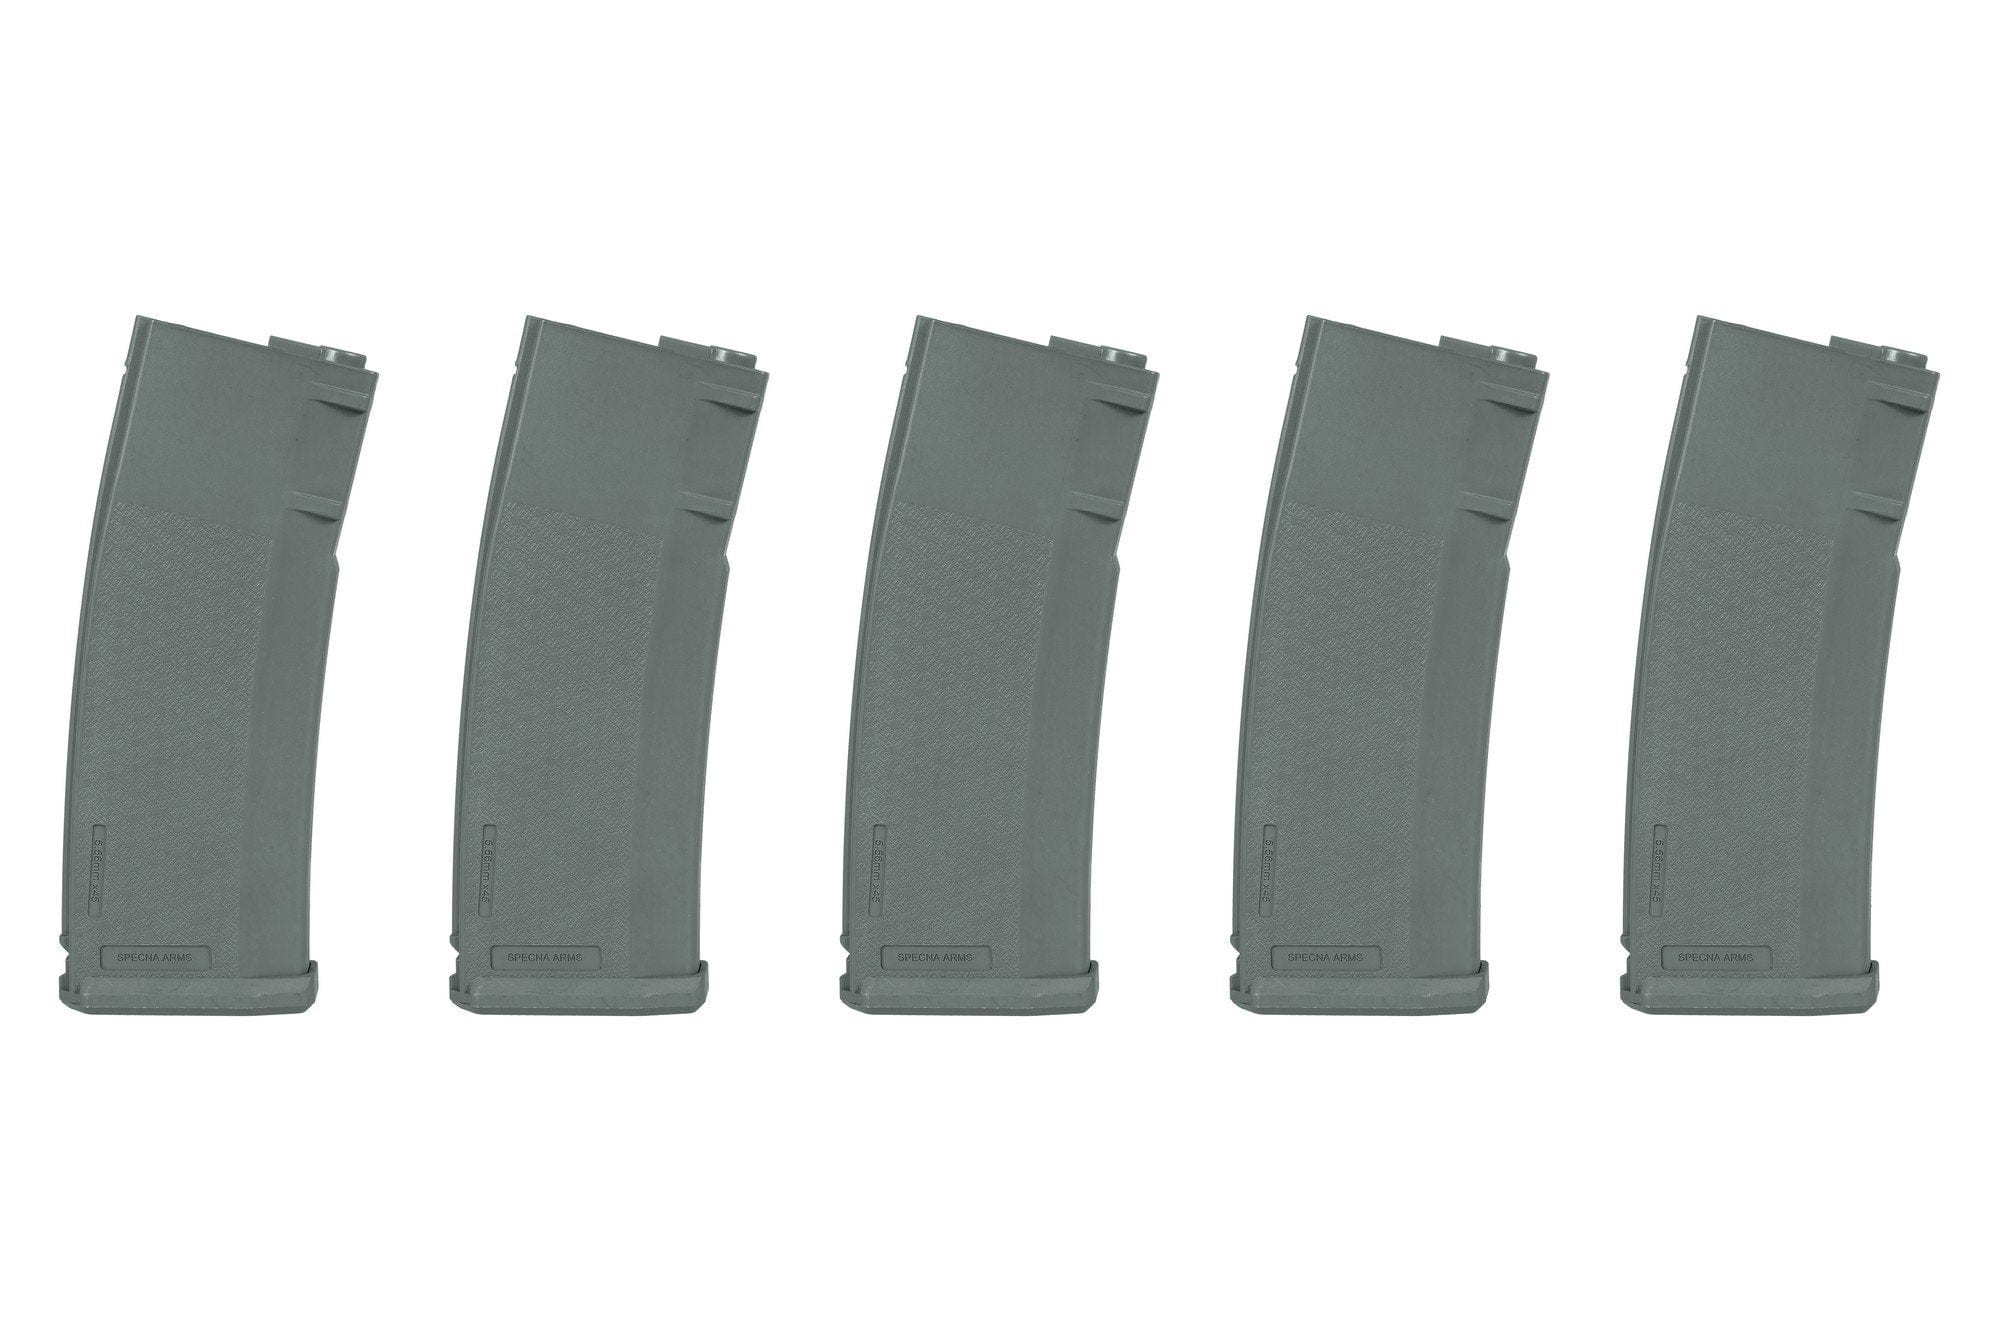 Set of 5 S-Mag Hi-Cap 300 BB Magazines - Chaos Grey by Specna Arms on Airsoft Mania Europe